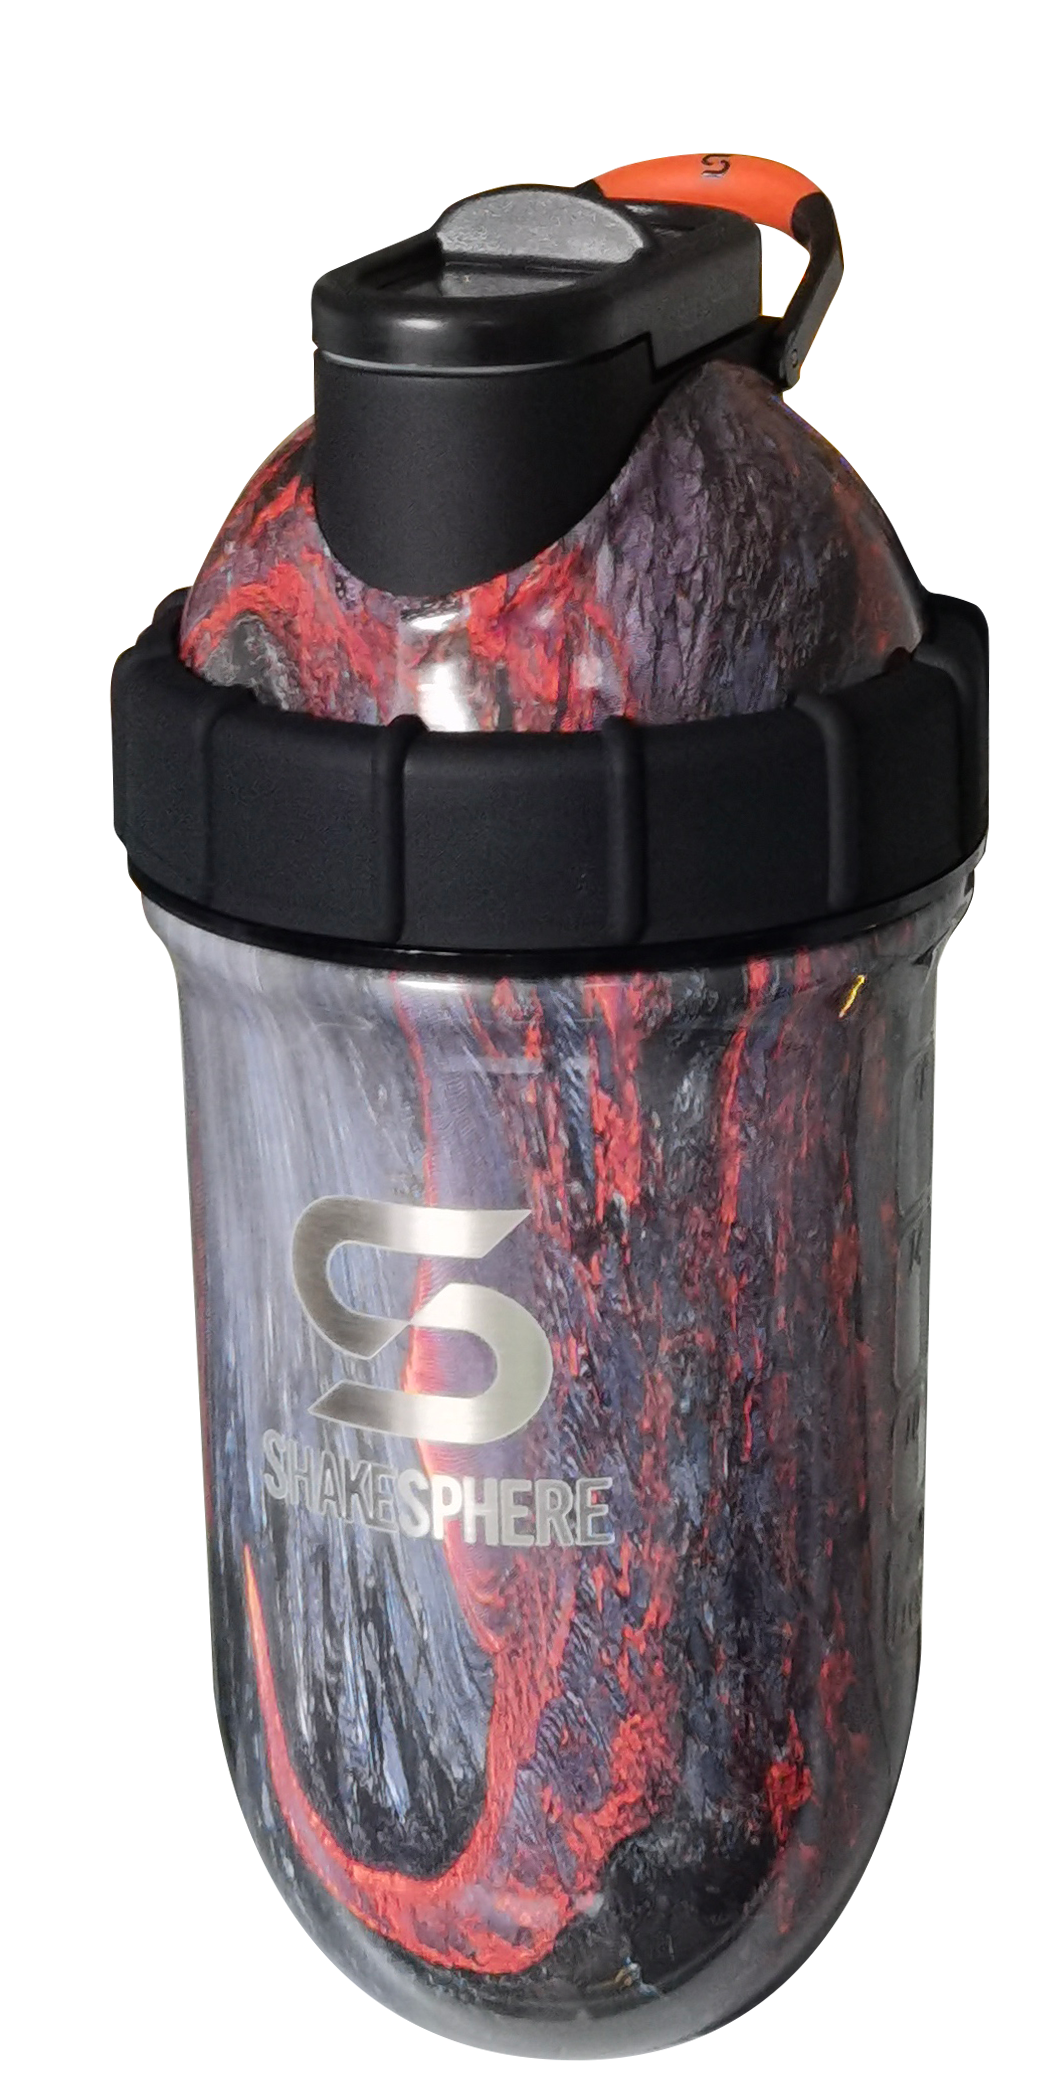 Lava 24 oz. Fitness Shaker Cup